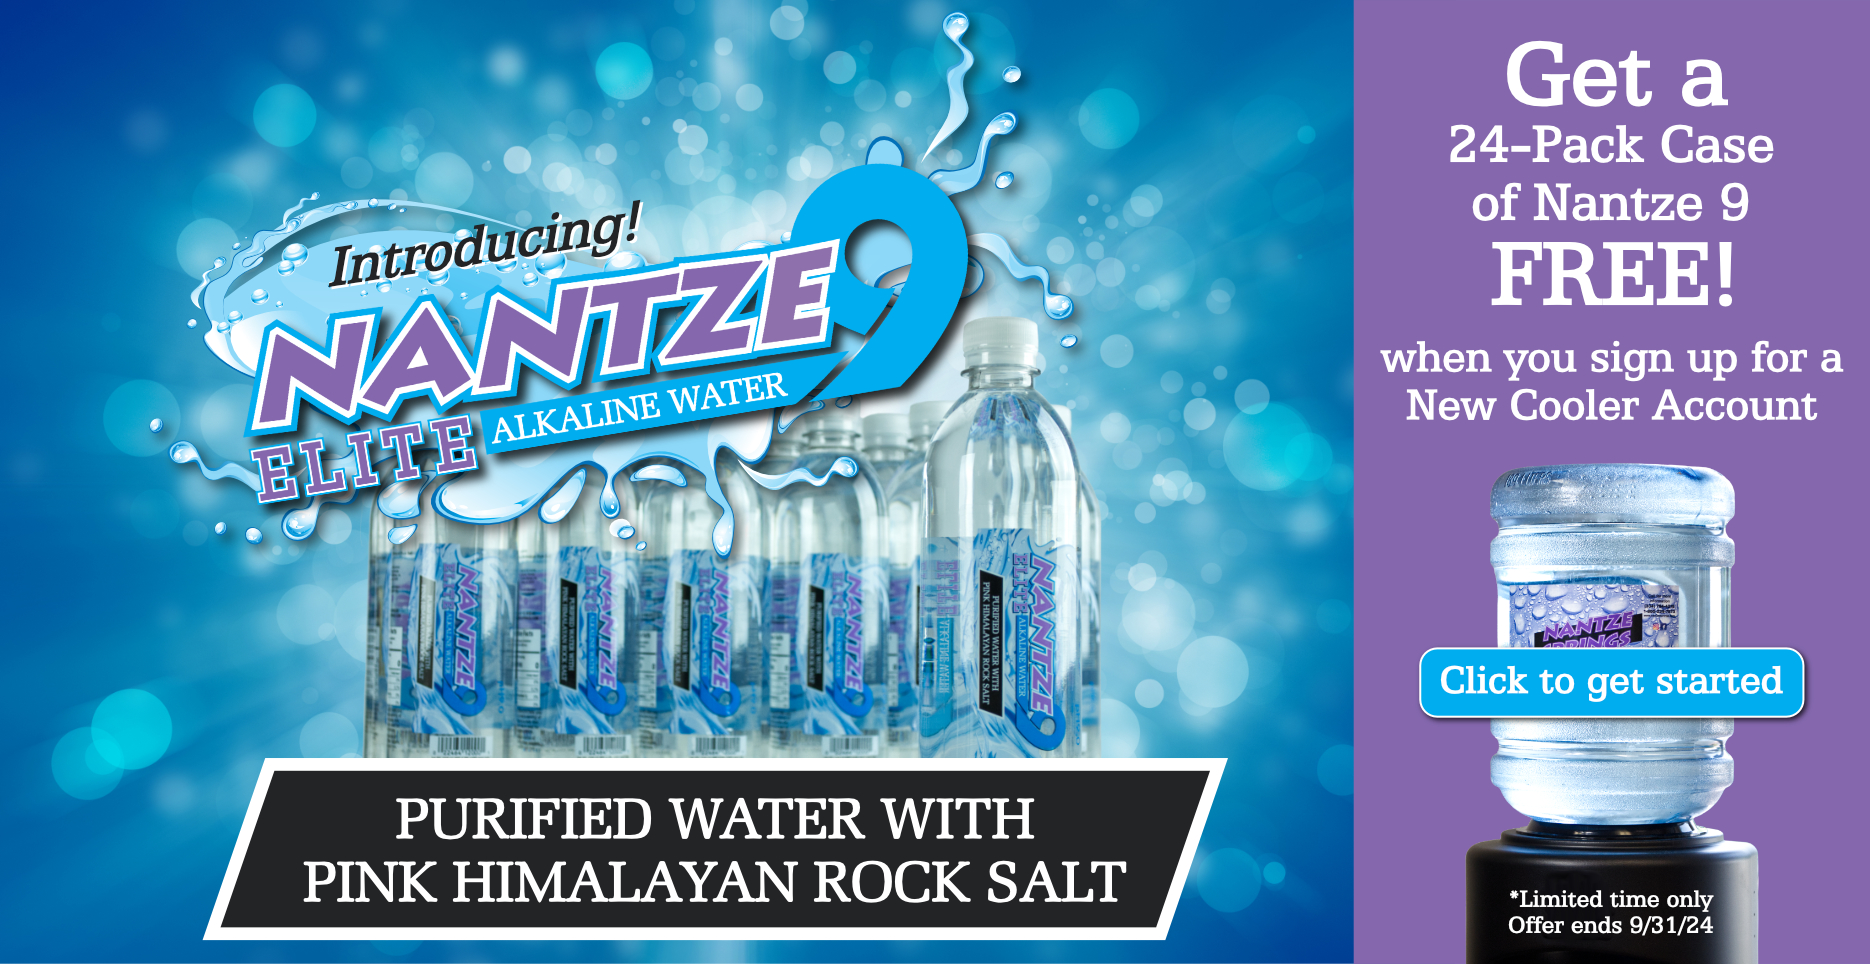 Get a 24-pack case of Nantze 9 free when you sign up for new cooler account.